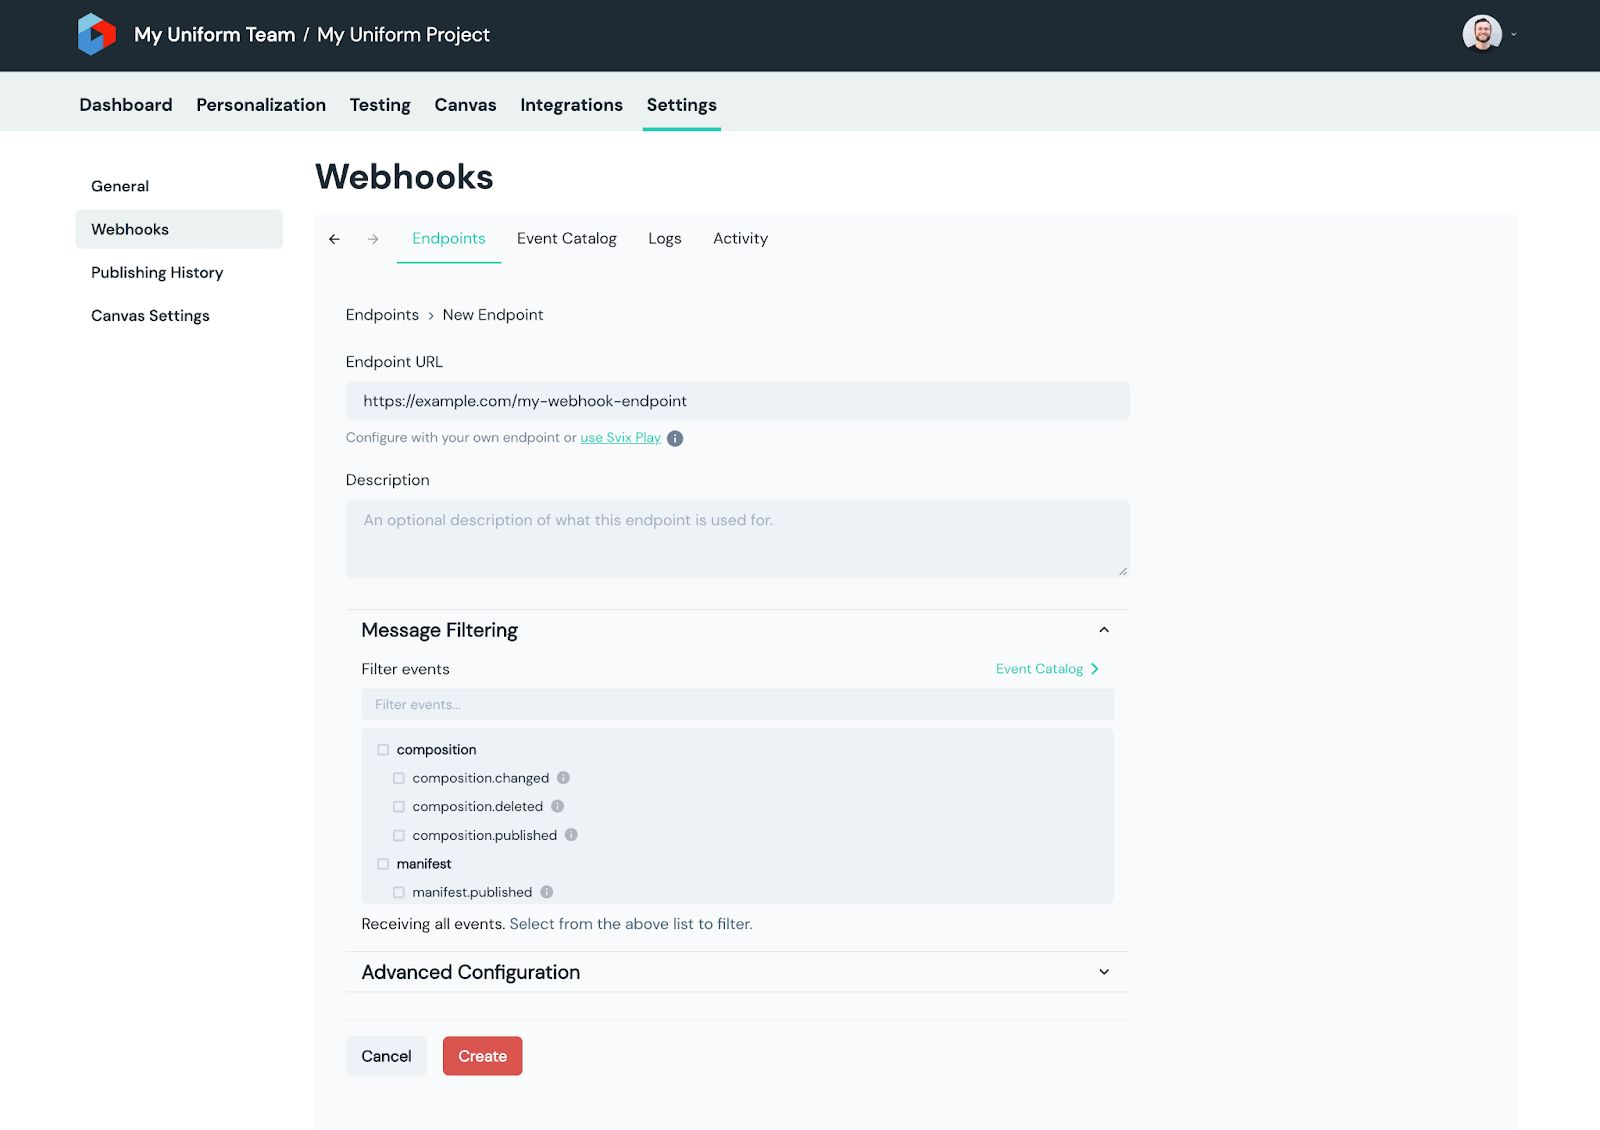 Improved webhook creation and management interface